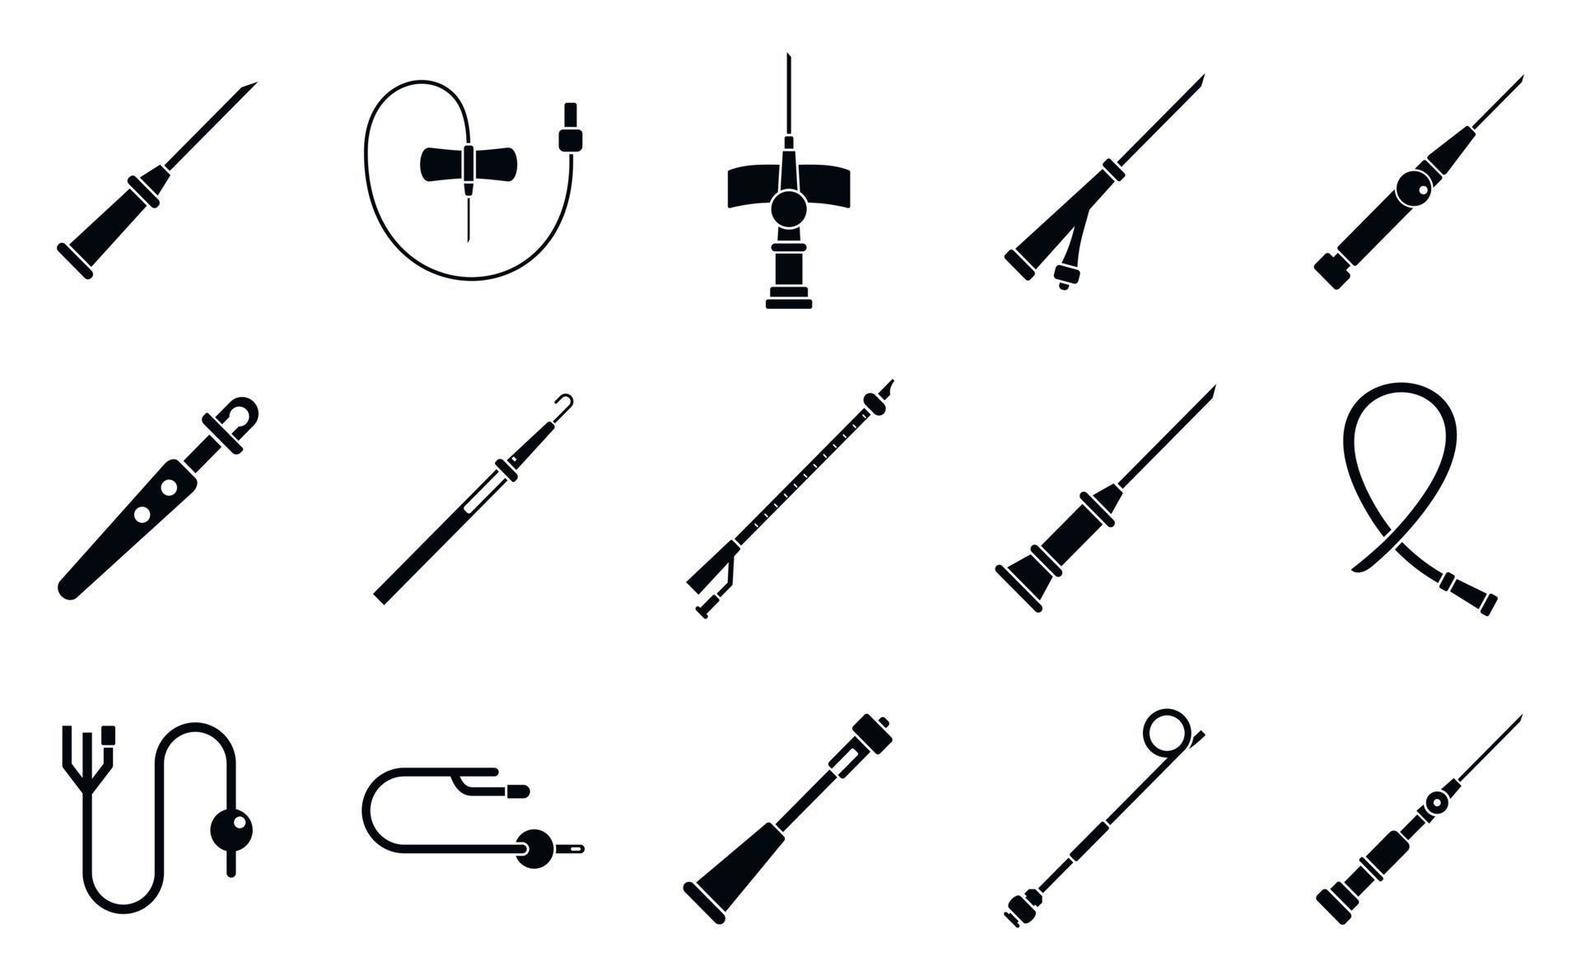 Catheter icons set, simple style vector